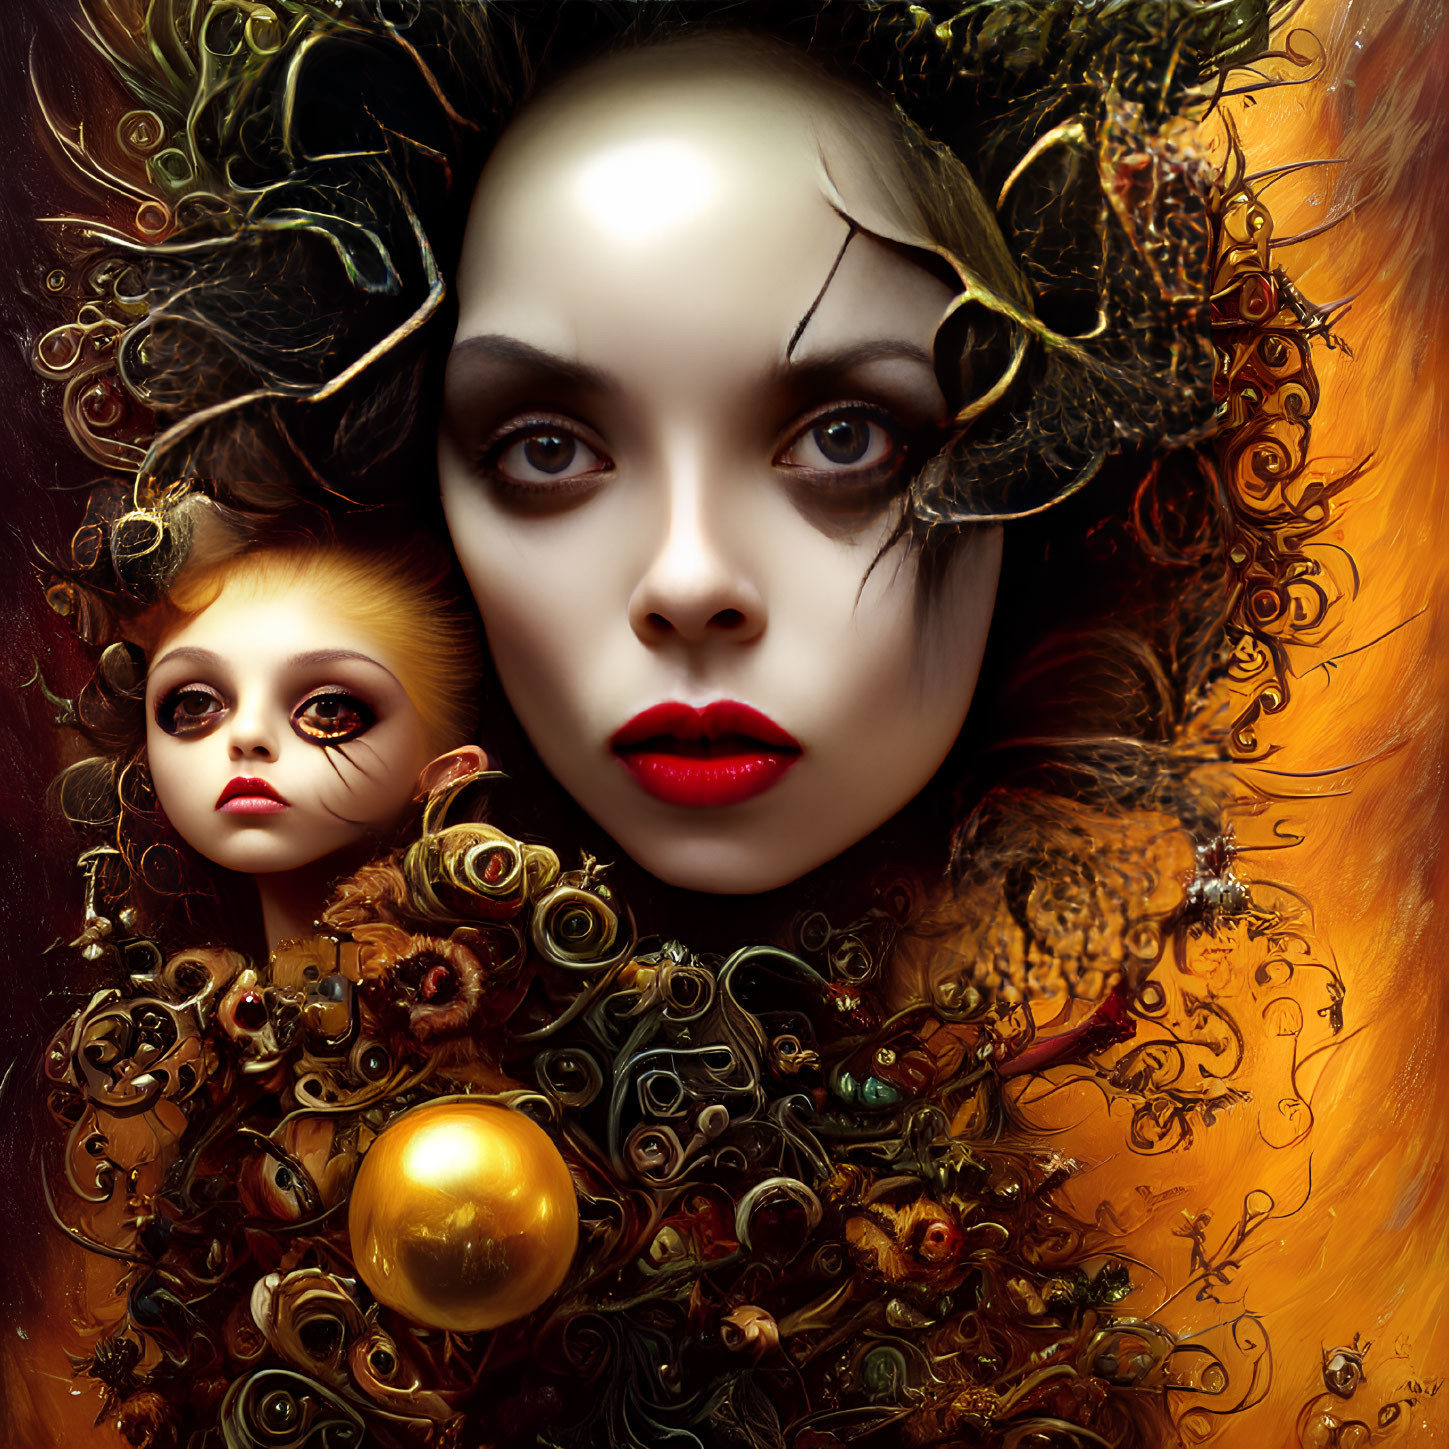 Elaborate surreal portrait with gold and bronze adornments in autumnal hues